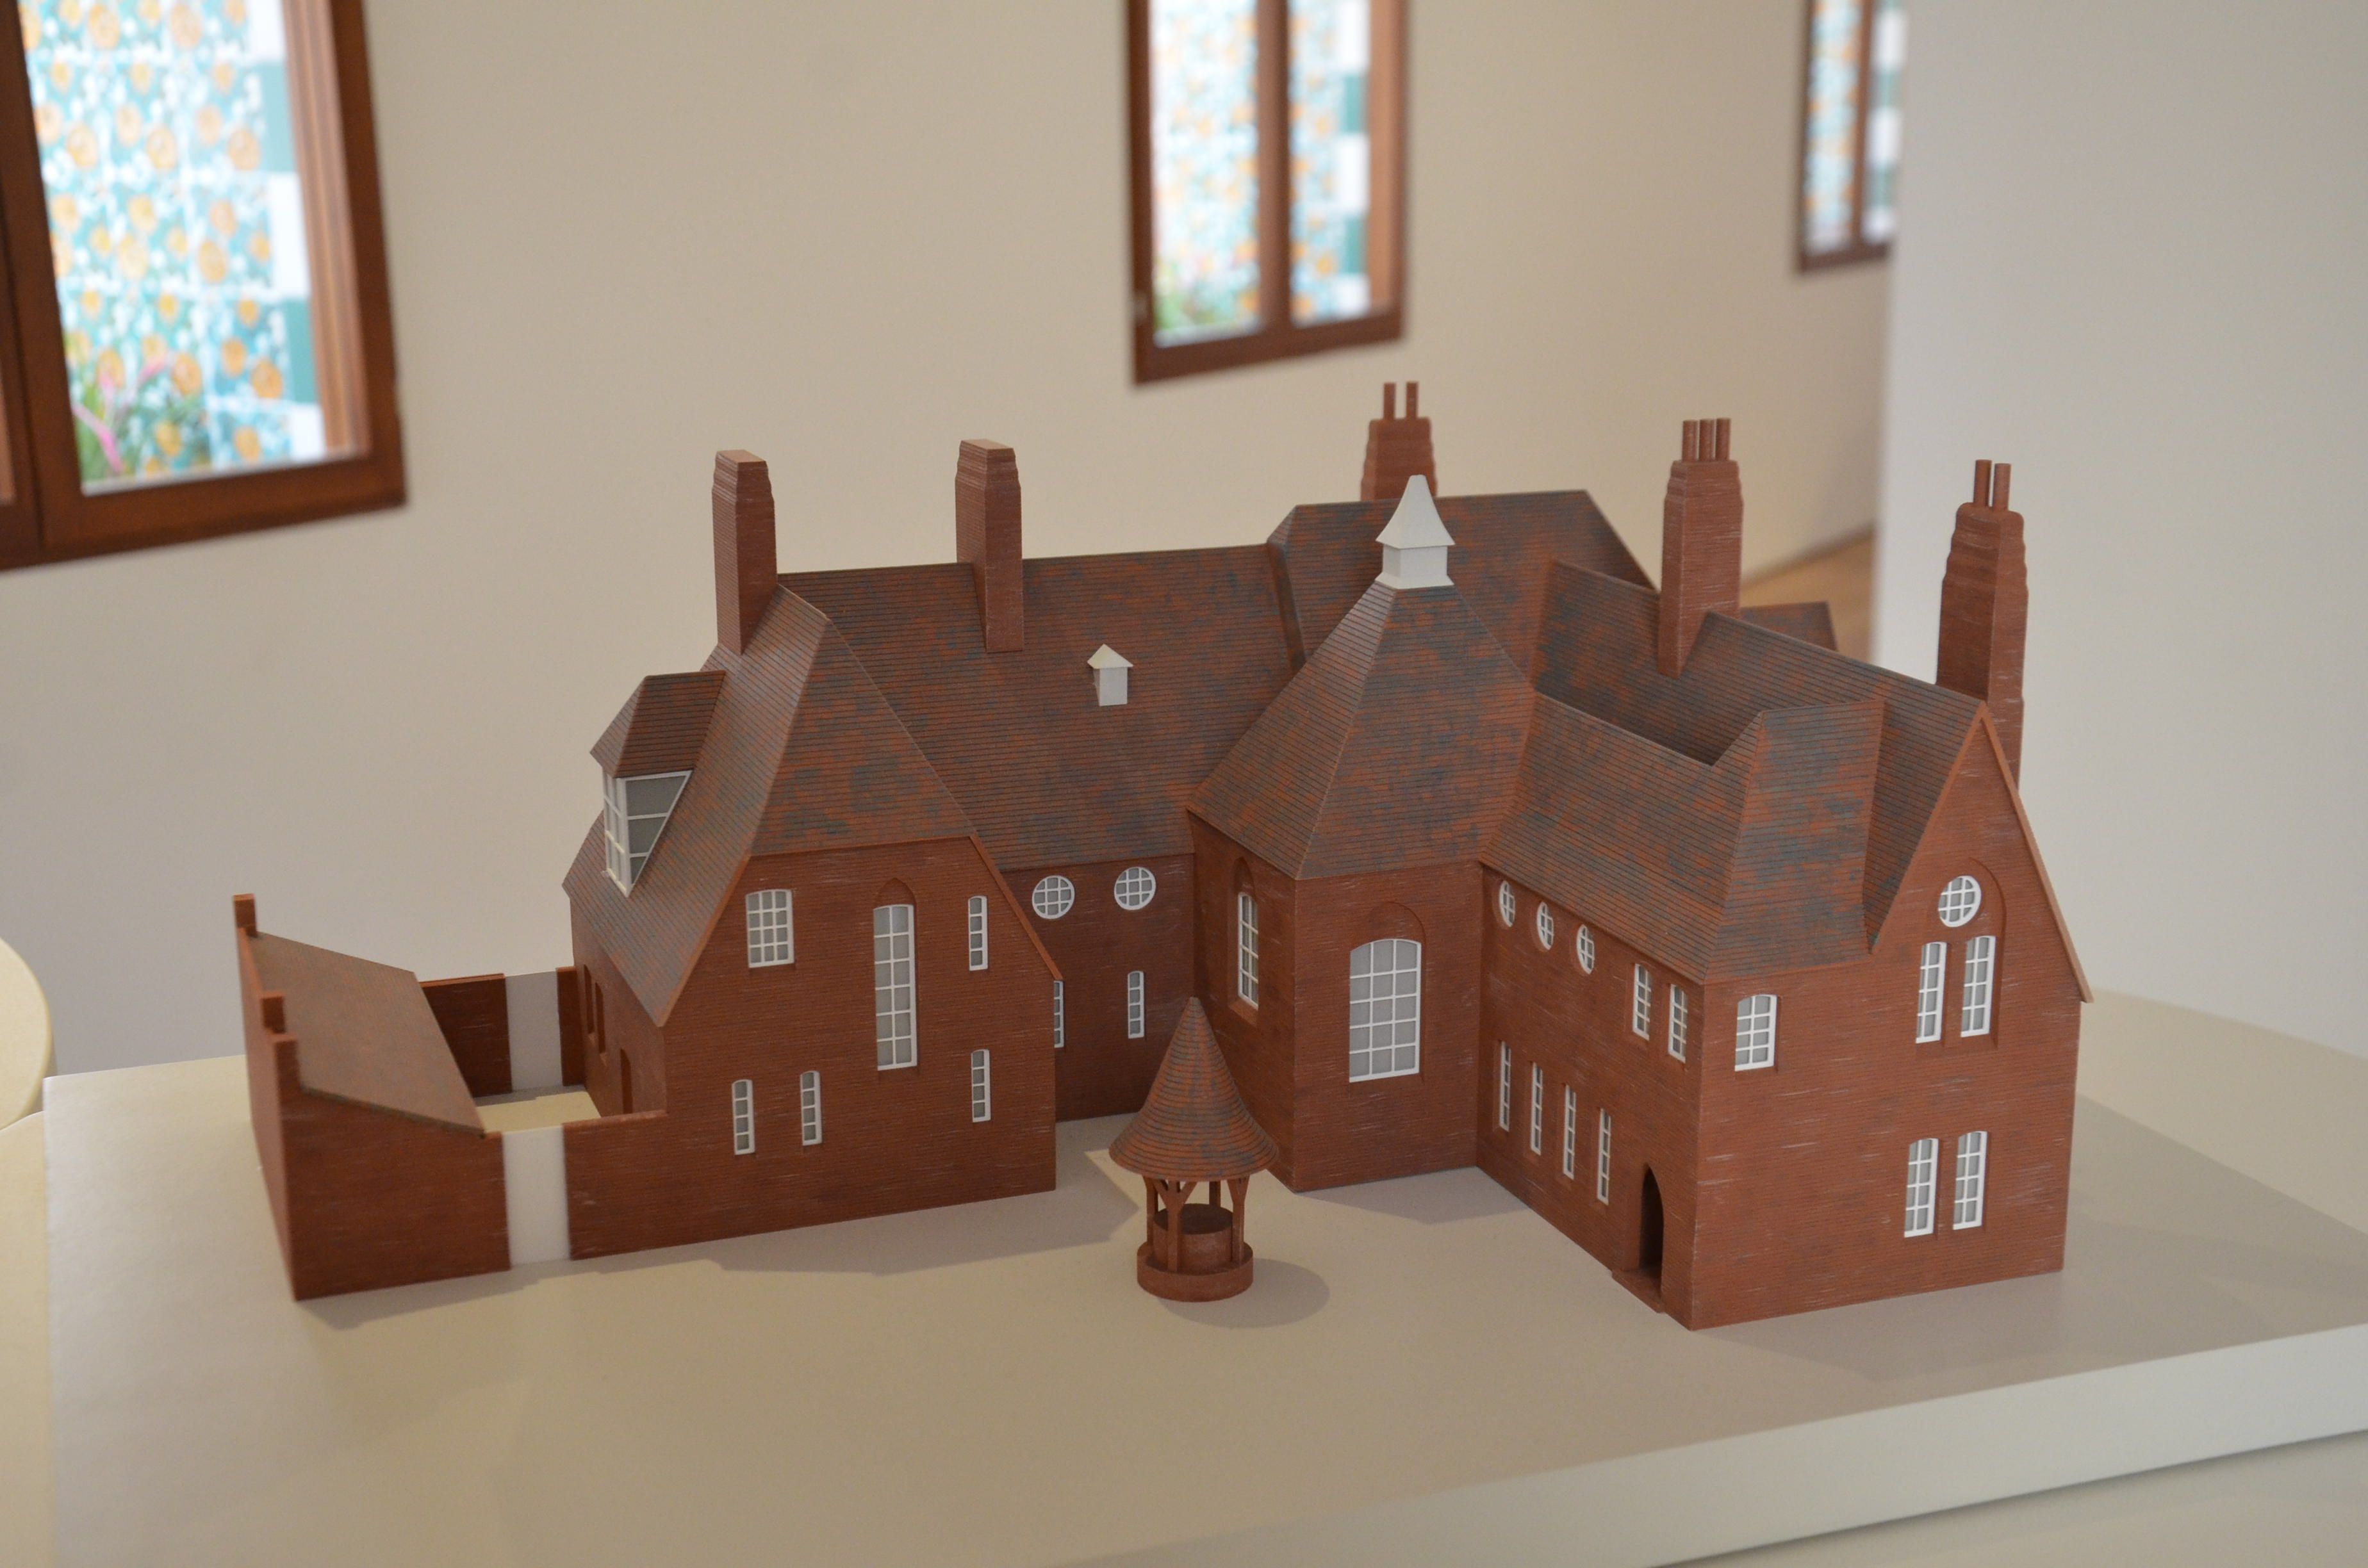 The first house, the architect’s house, the manifesto house, Exhibition, Casa Vicens, Barcelona